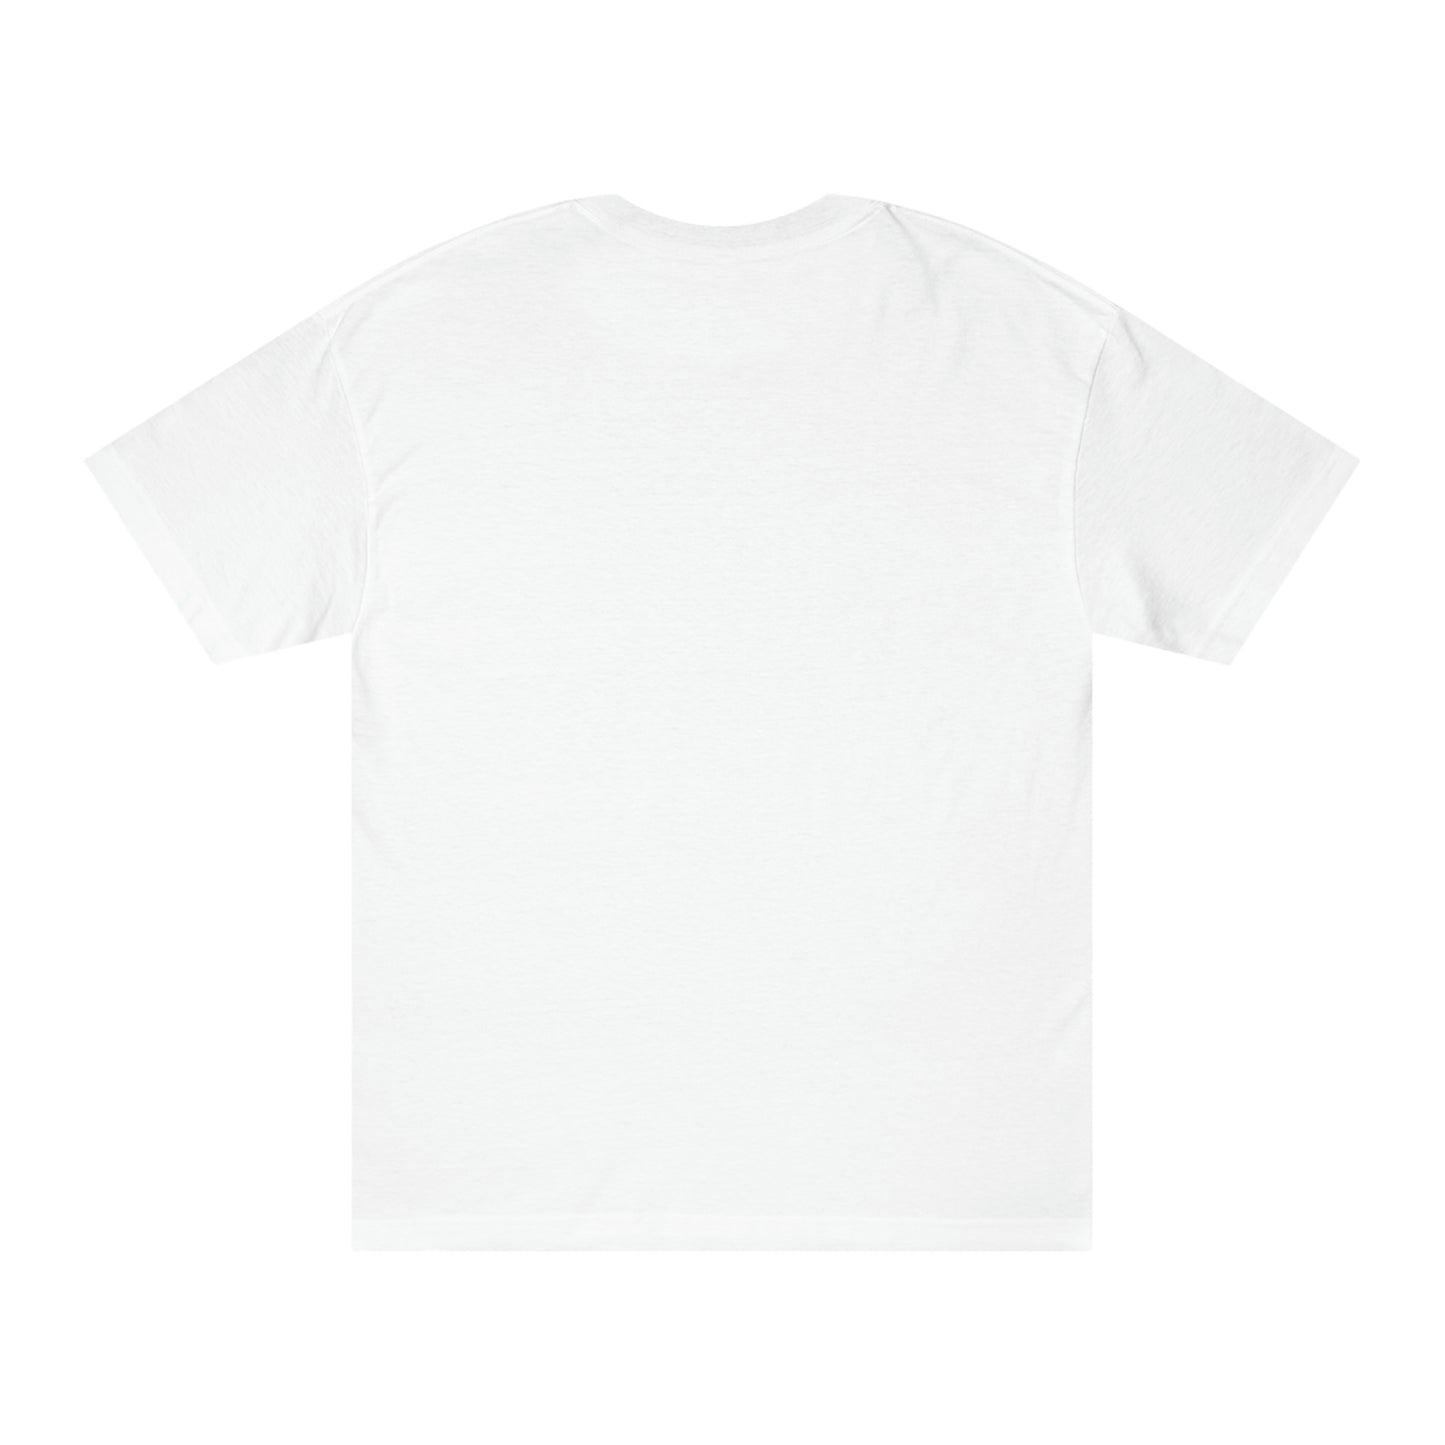 Classic I Like to Waste My Time White T-shirt